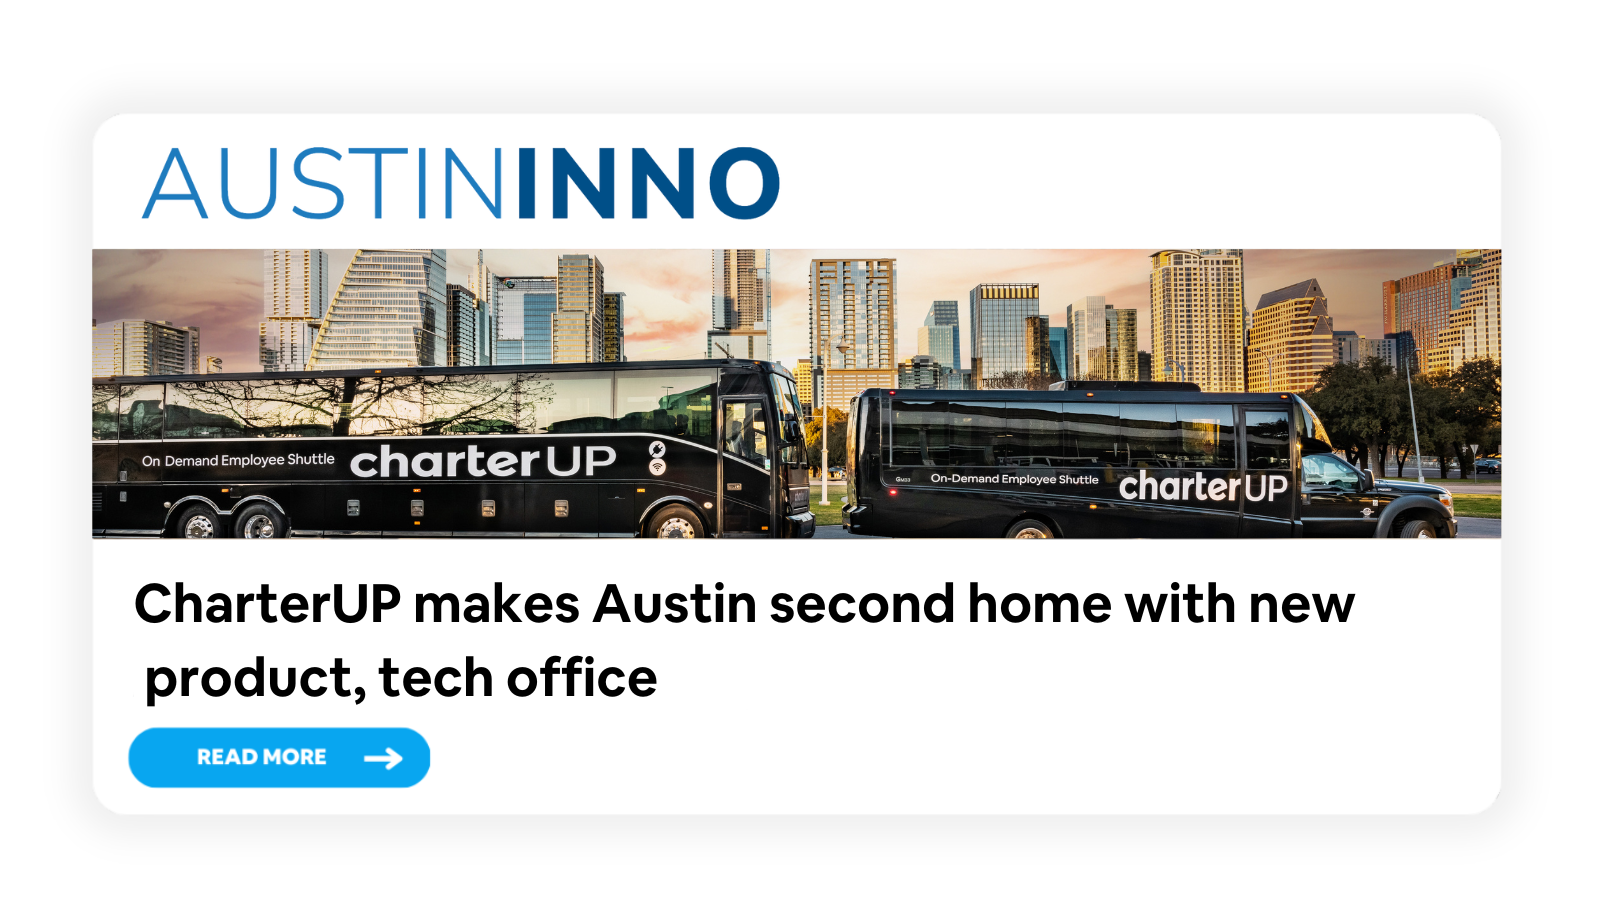 AustinInno Headline: CharterUP Makes Austin Second Home With New Product, Tech Office